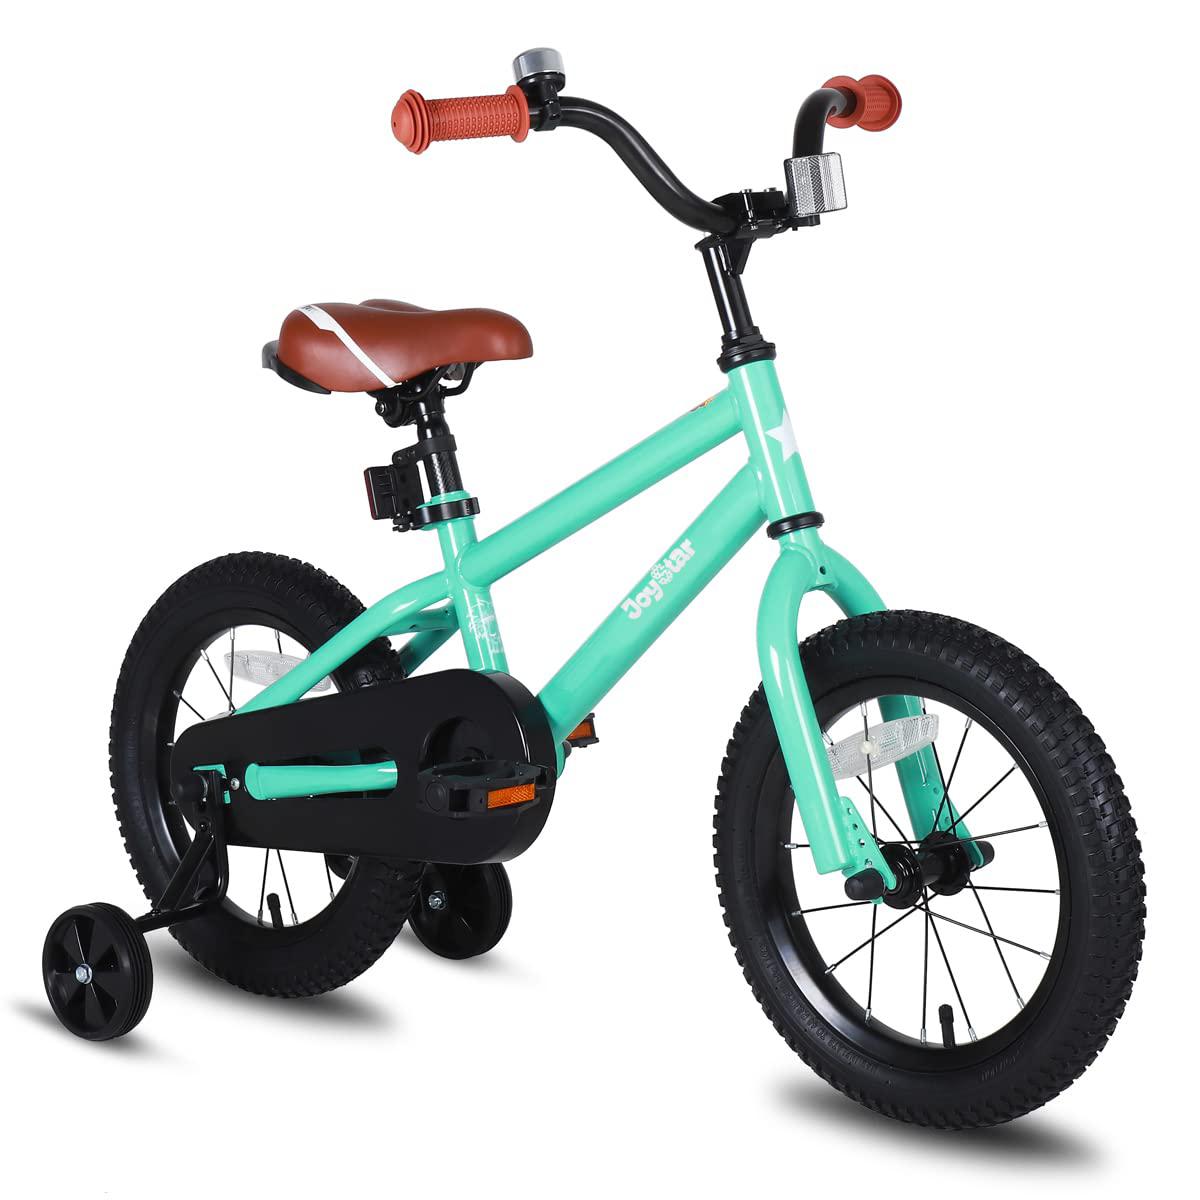 joystar 14 inch kids bike for boys girls 3 4 5 years old ages toddler bicycle with training wheels children bikes with foot b